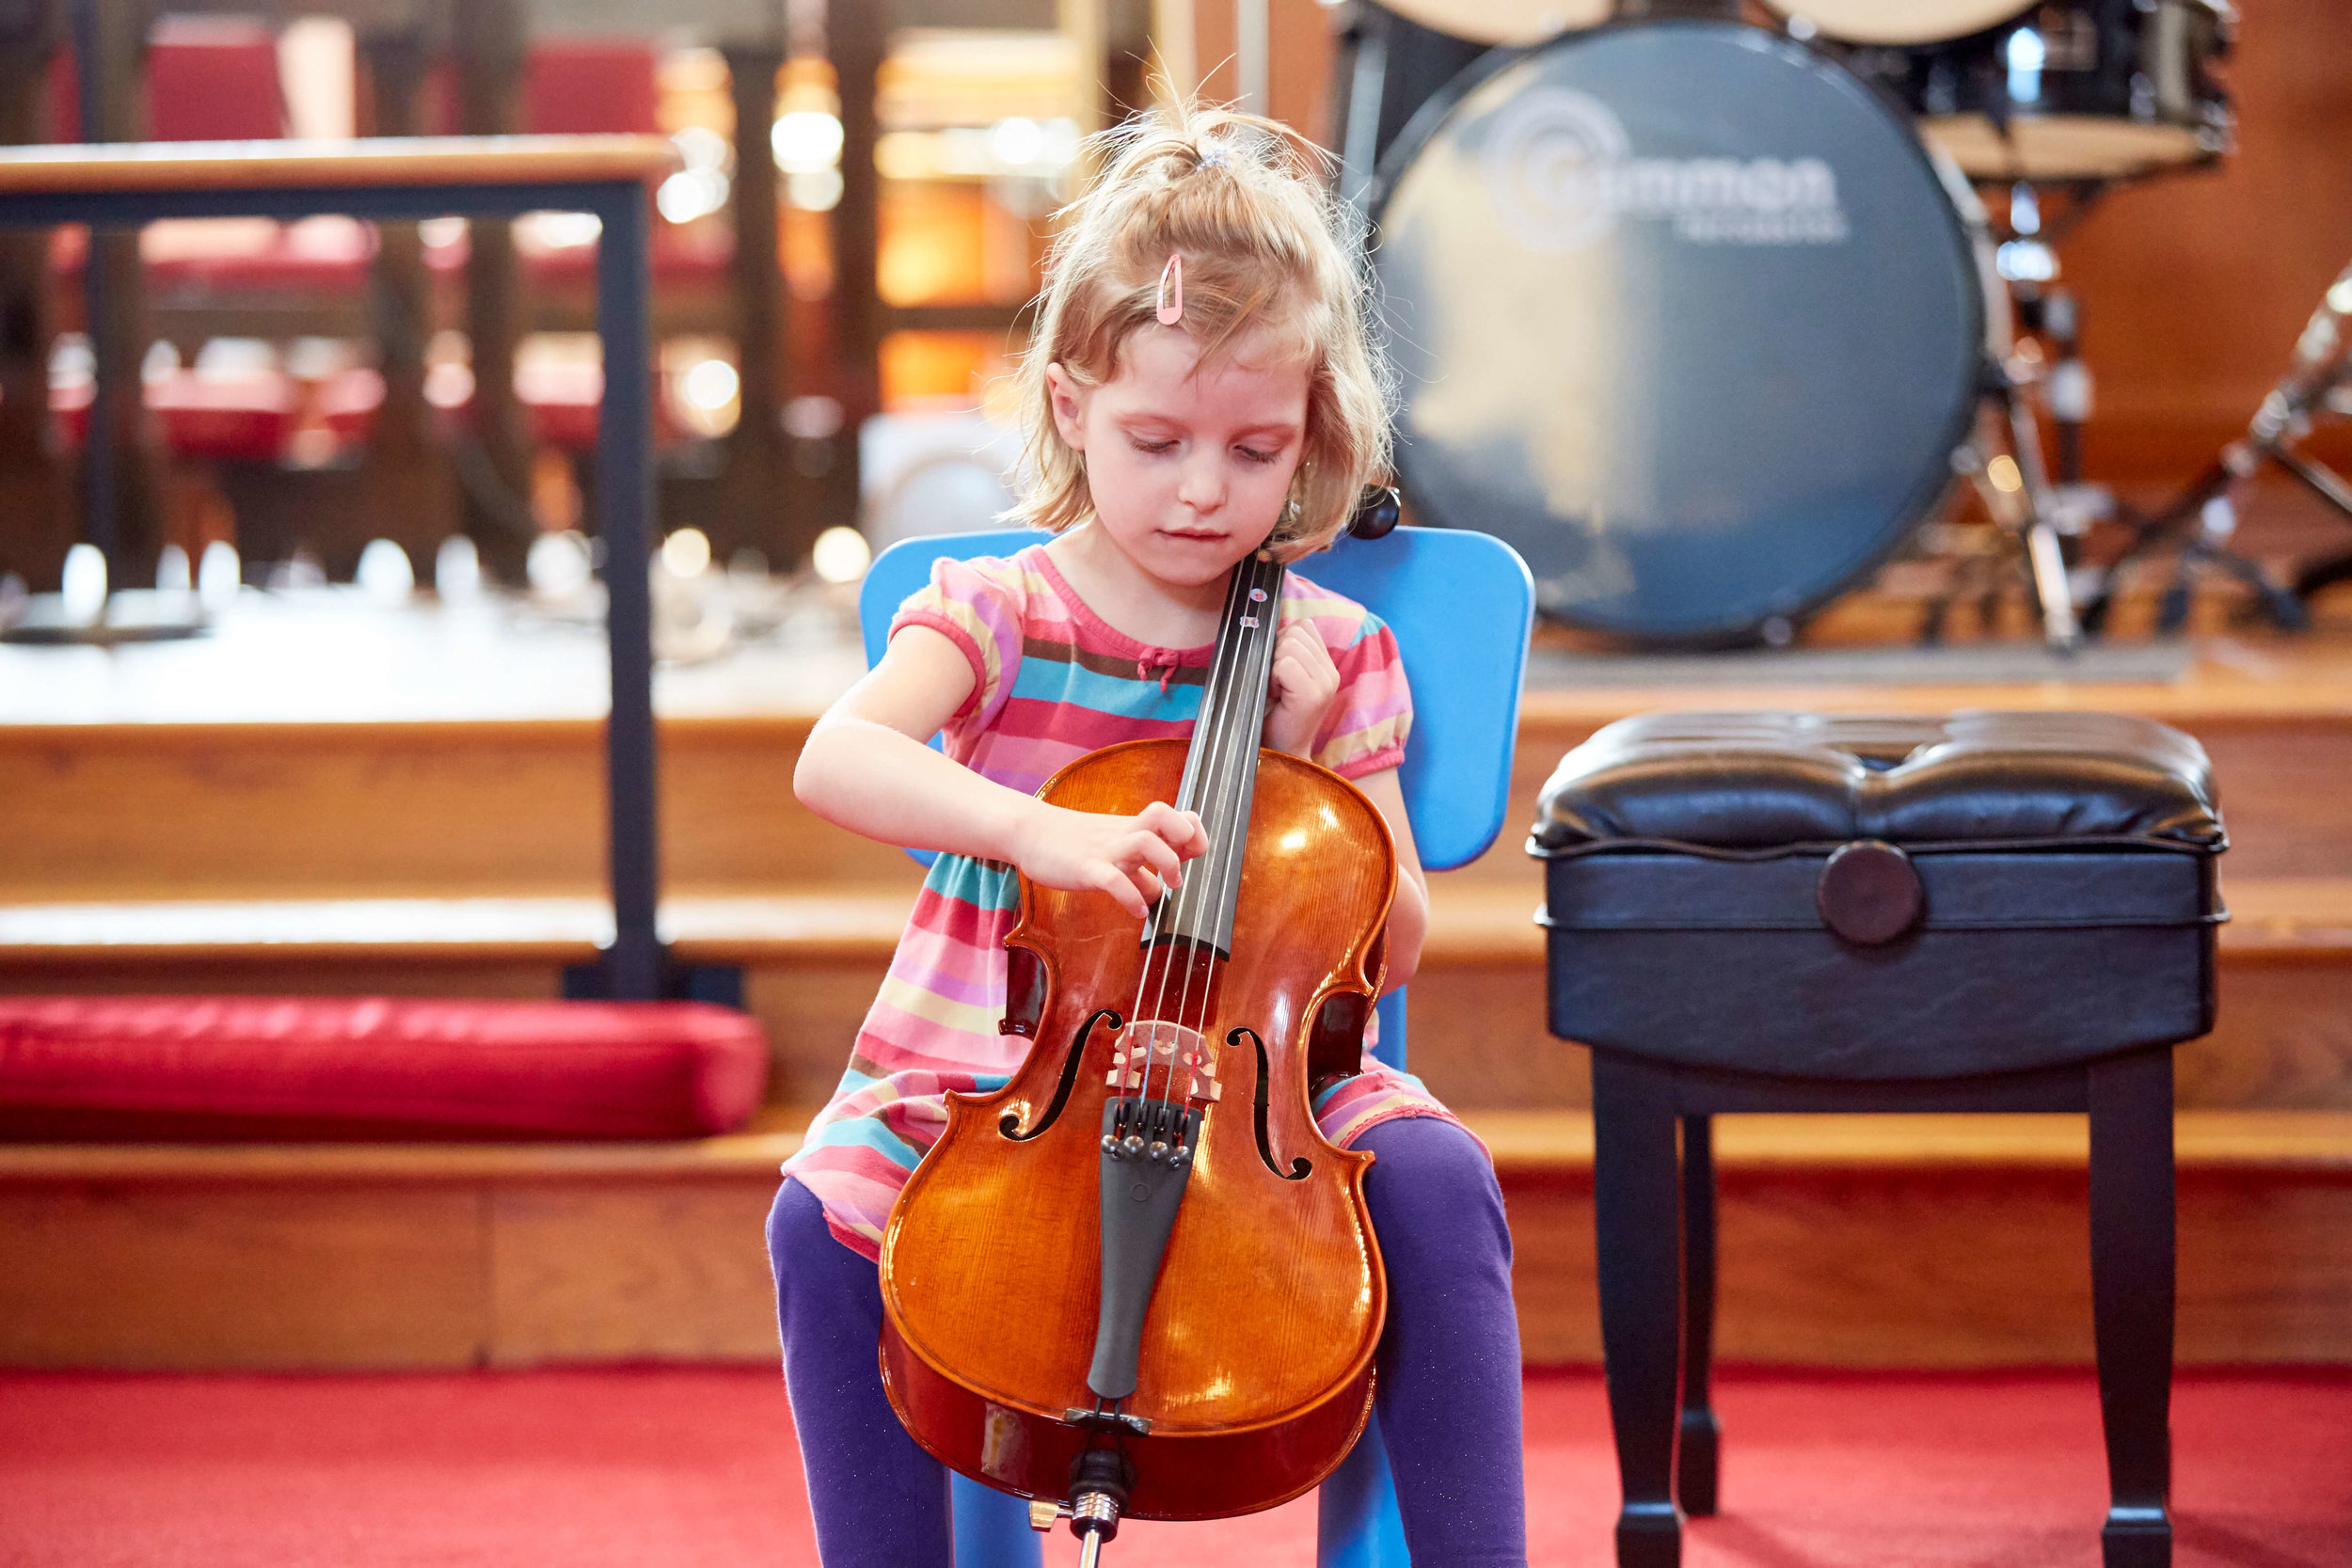   VIOLIN/CELLO LESSONS IN CINCINNATI, ANDERSON &amp; MASON   for beginner, intermediate, and advanced students of all ages  CALL  513-560-9175  TODAY TO SCHEDULE YOUR FIRST LESSON   Request Info  